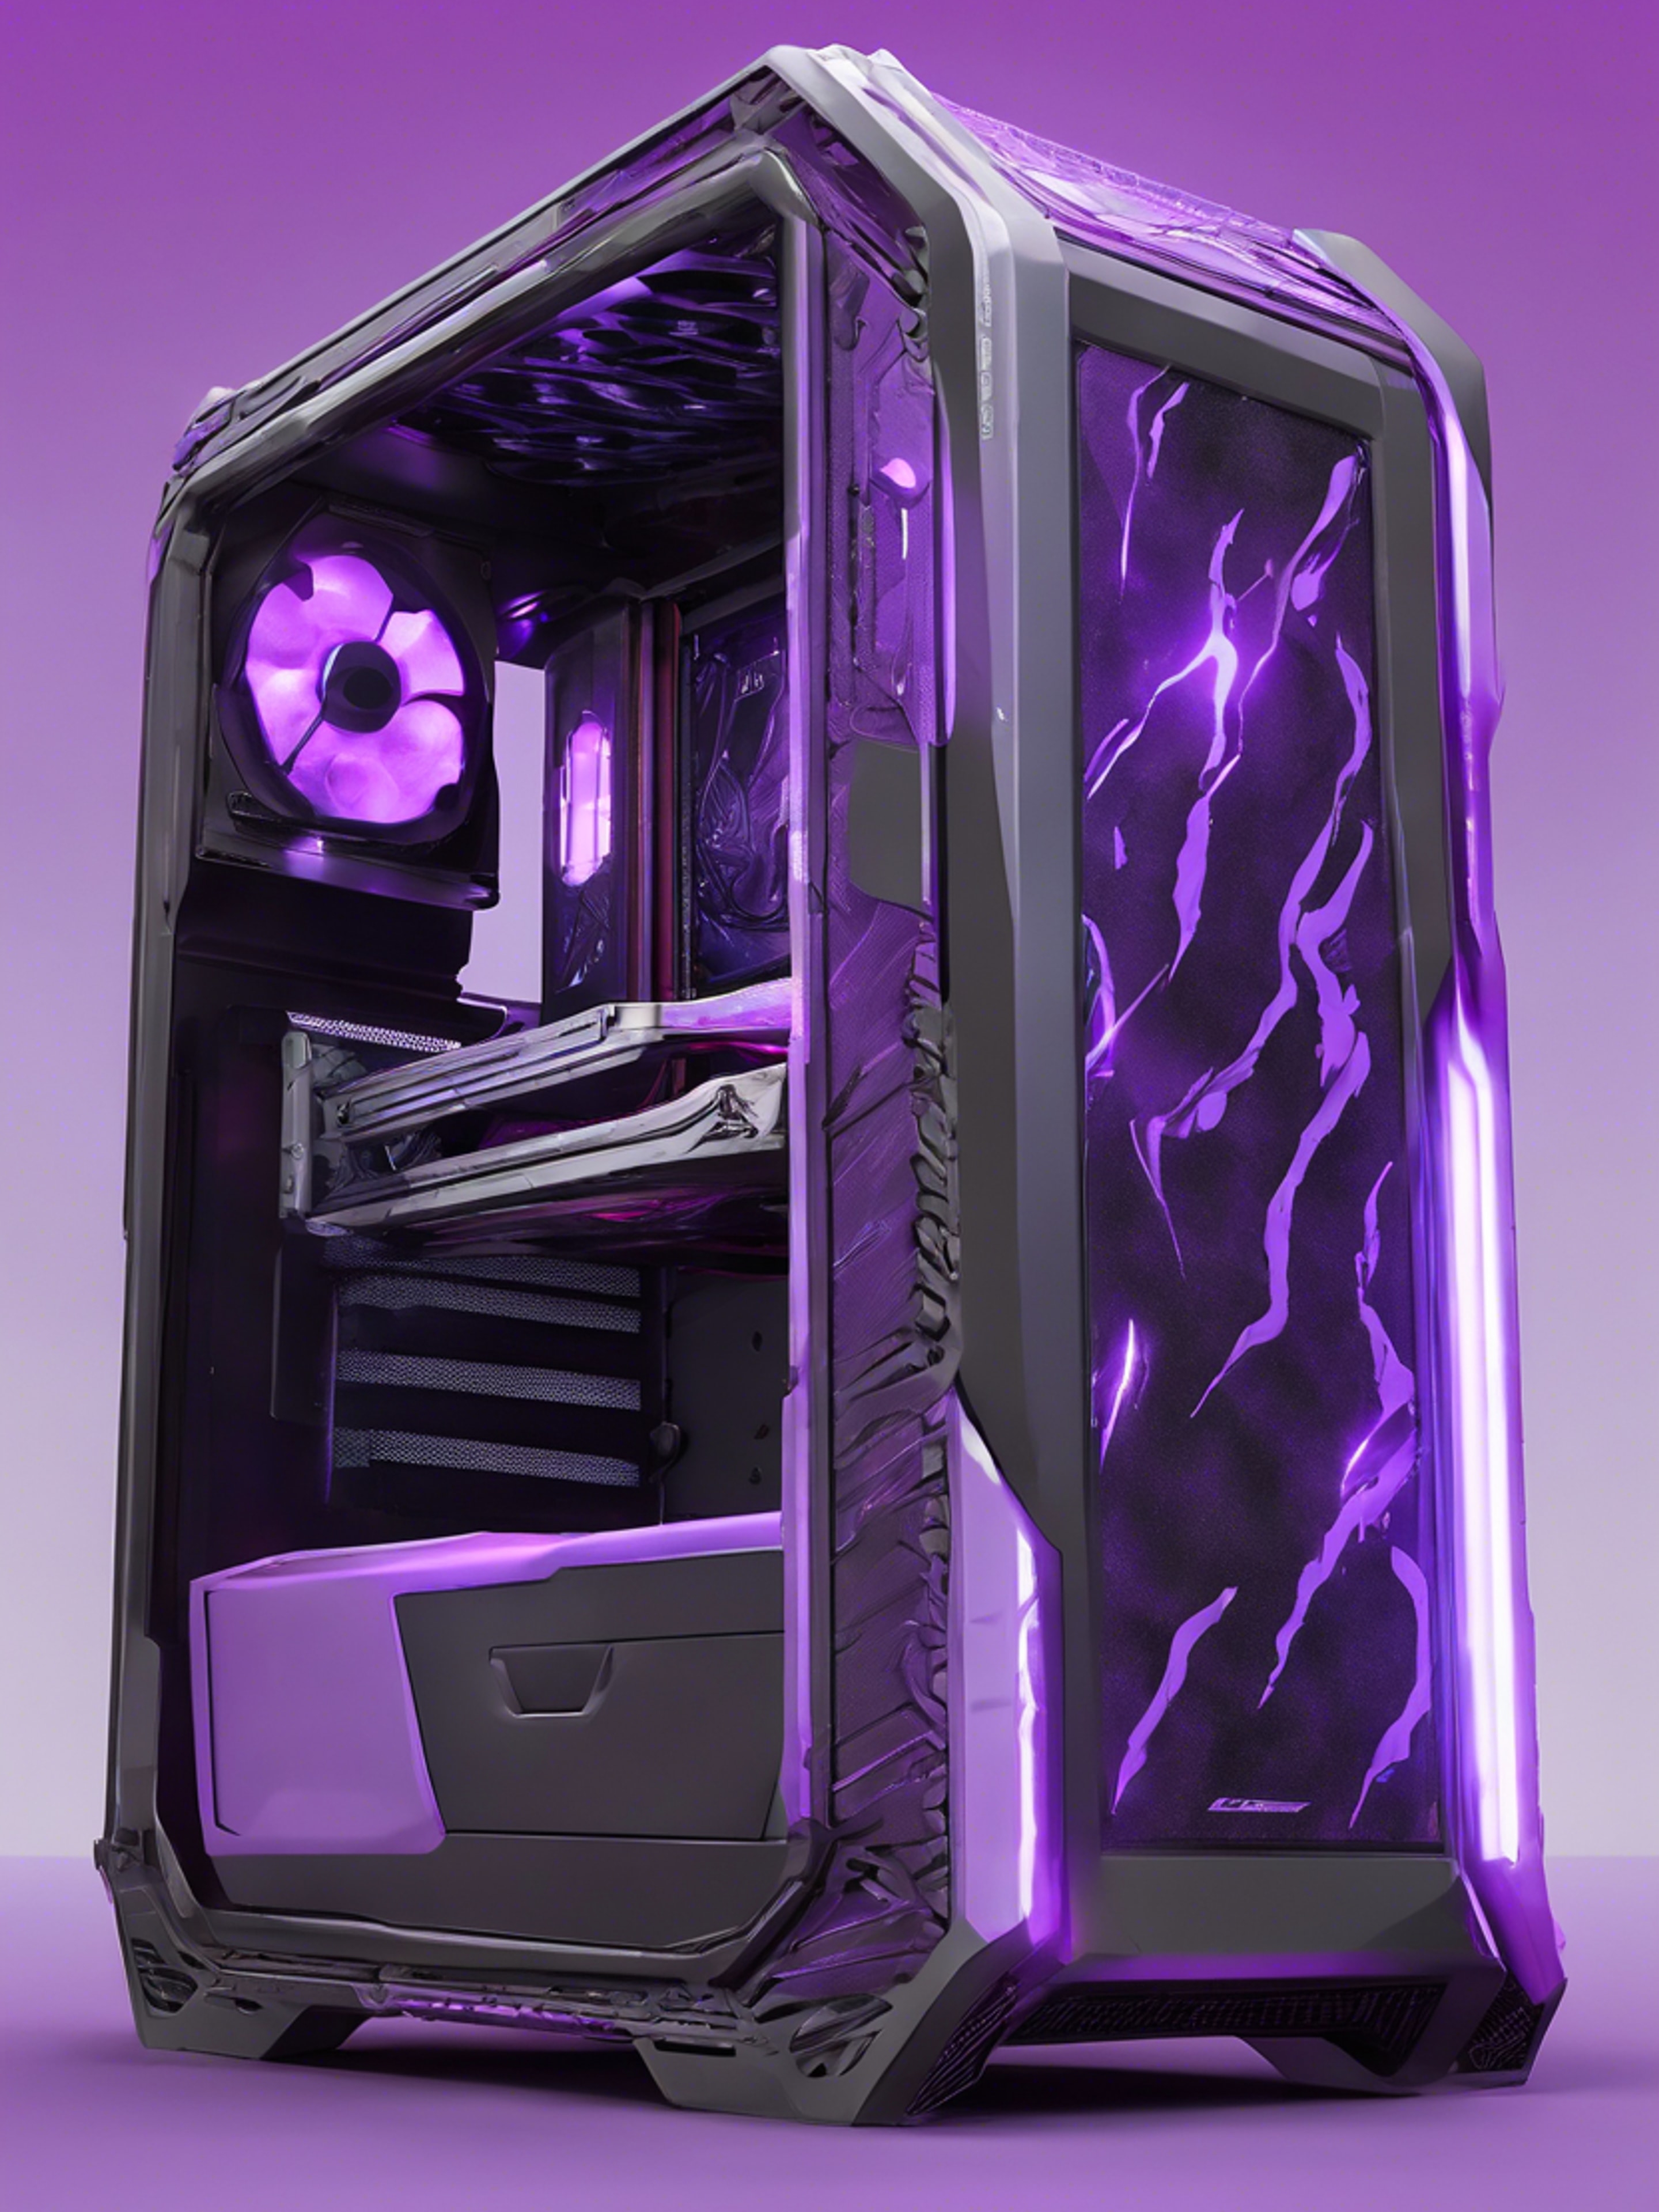 A side view of a thunderous gaming rig covered in custom neon purple detailing under cool lighting. Behang[cca71b66ee6840febbf4]